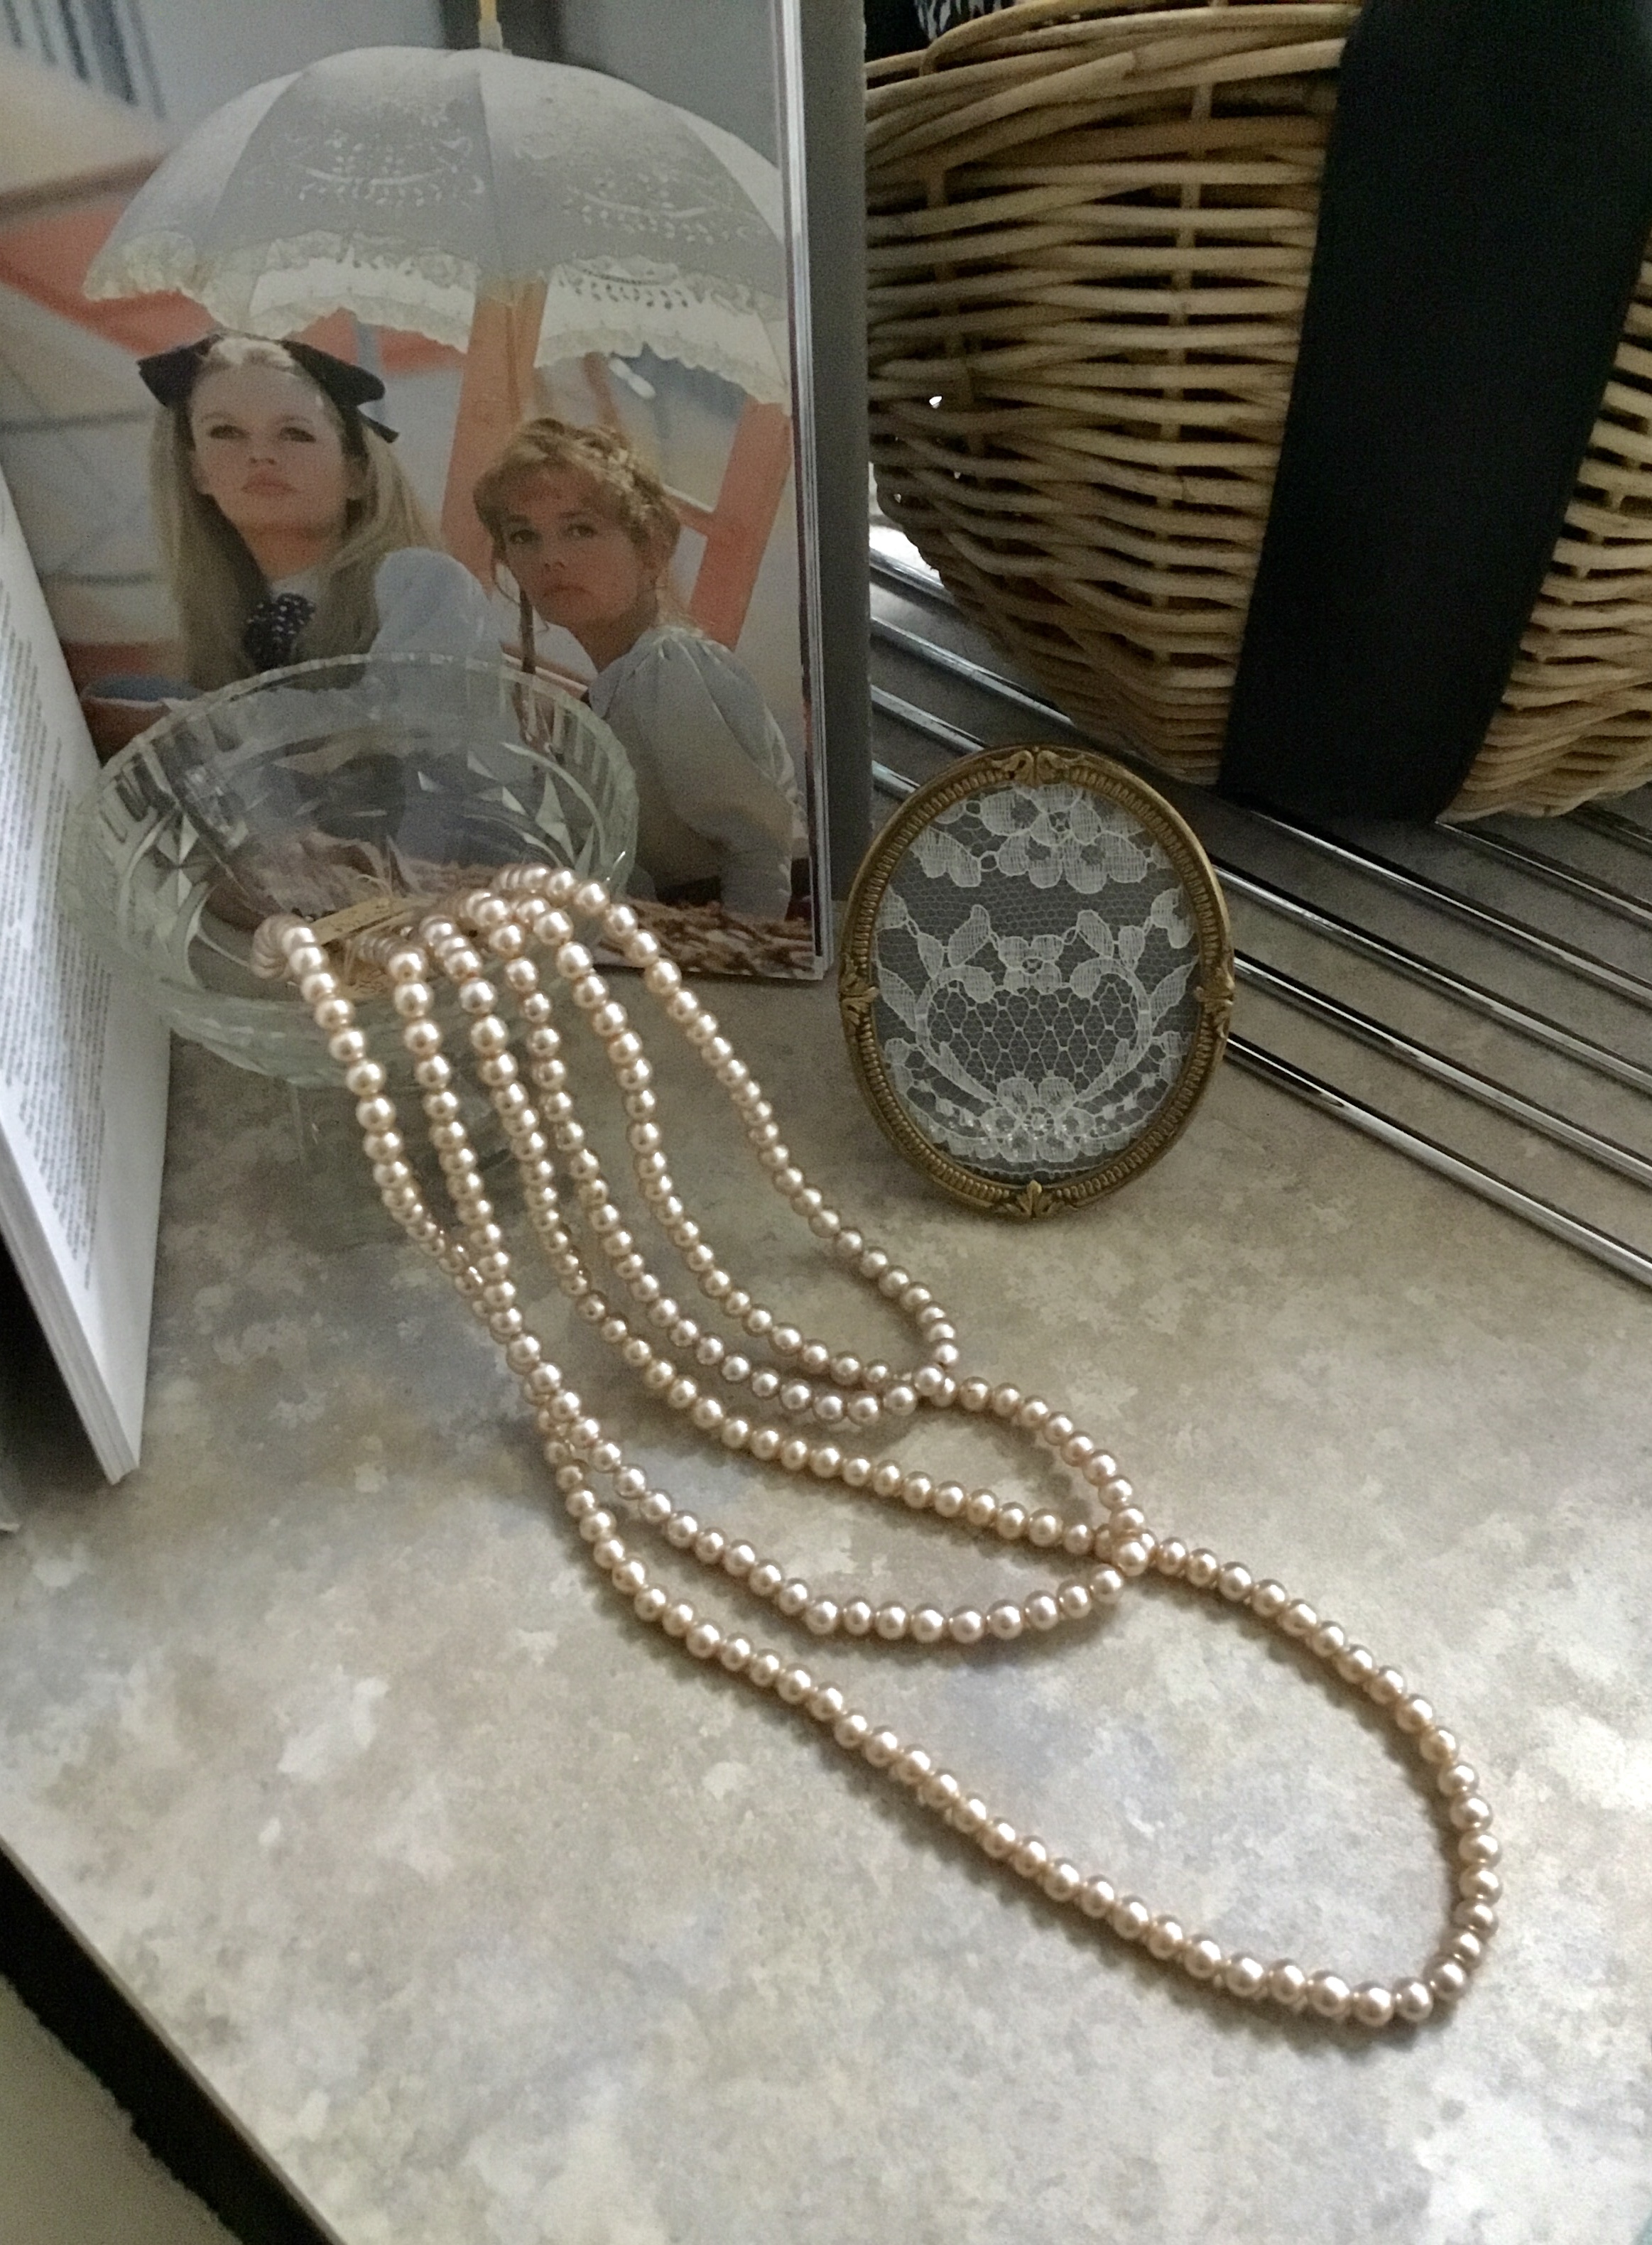 BUY NOW Dazzling 00417  SALE 20％off

Vintage Glass Pearl Necklace
ヴィンテージ ガラスパールネックレス